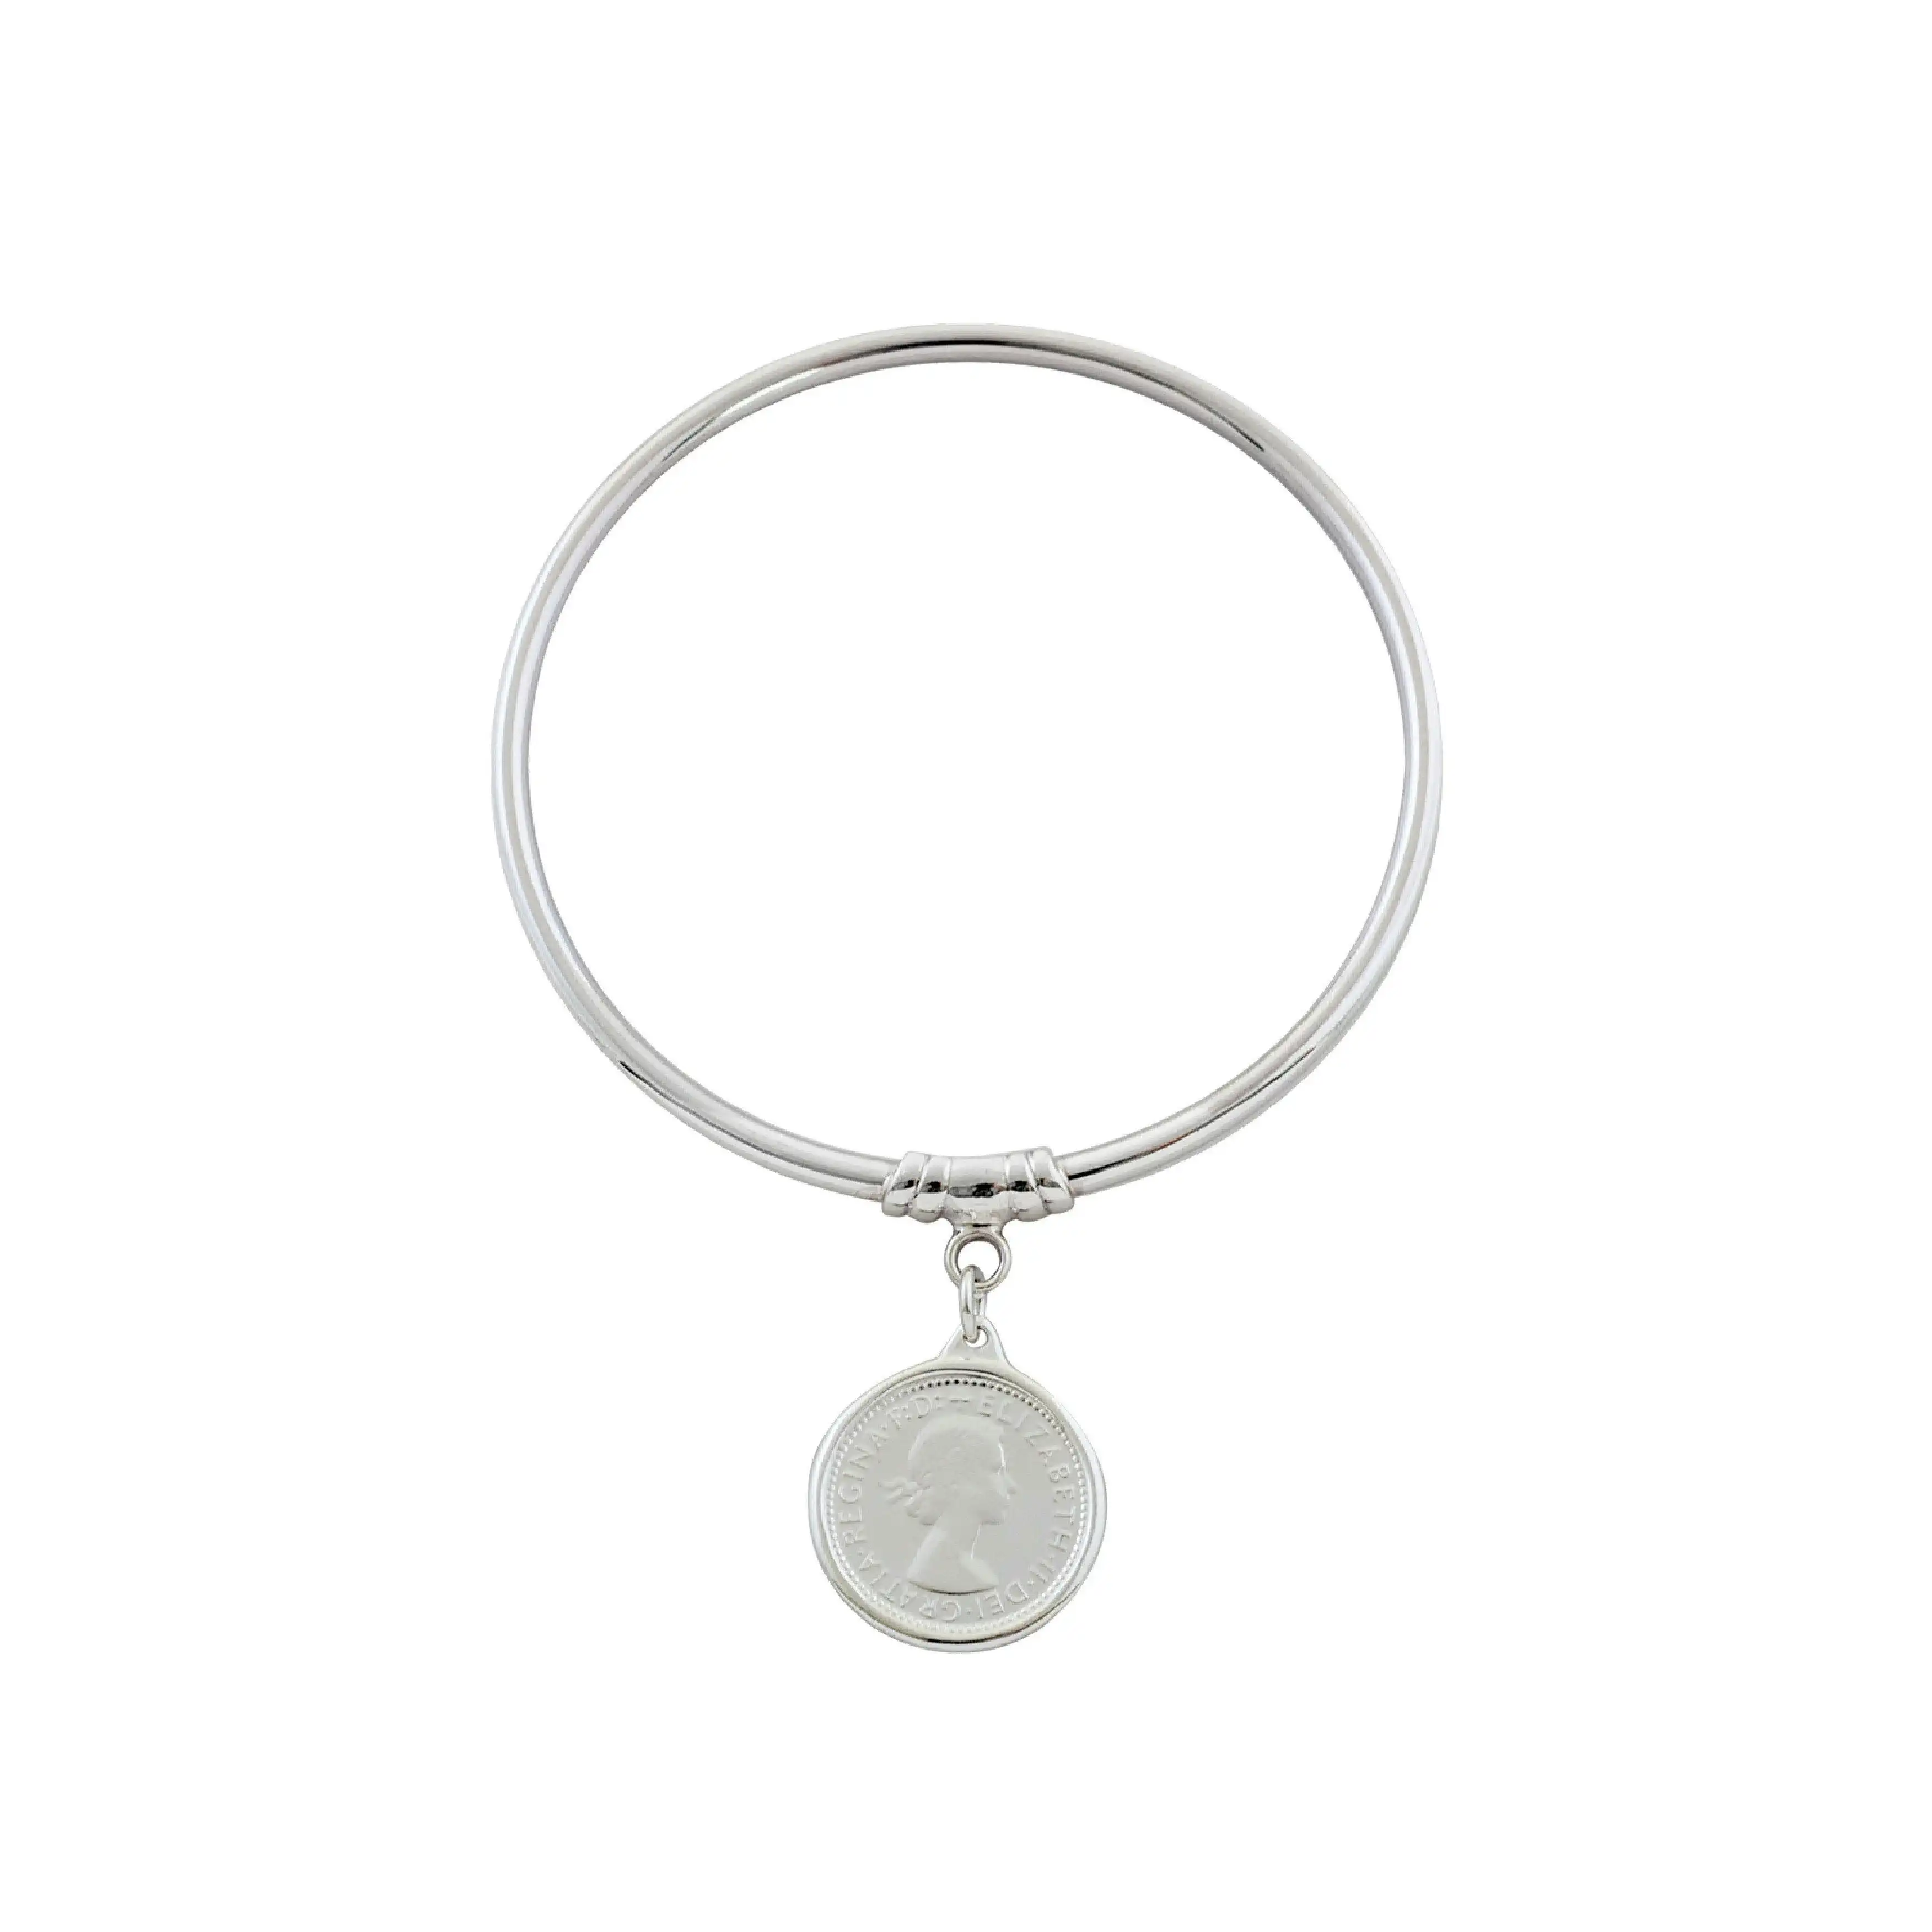 Von Treskow Sterling Silver 3mm Bangle with 6 Pence Coin (QUEEN)